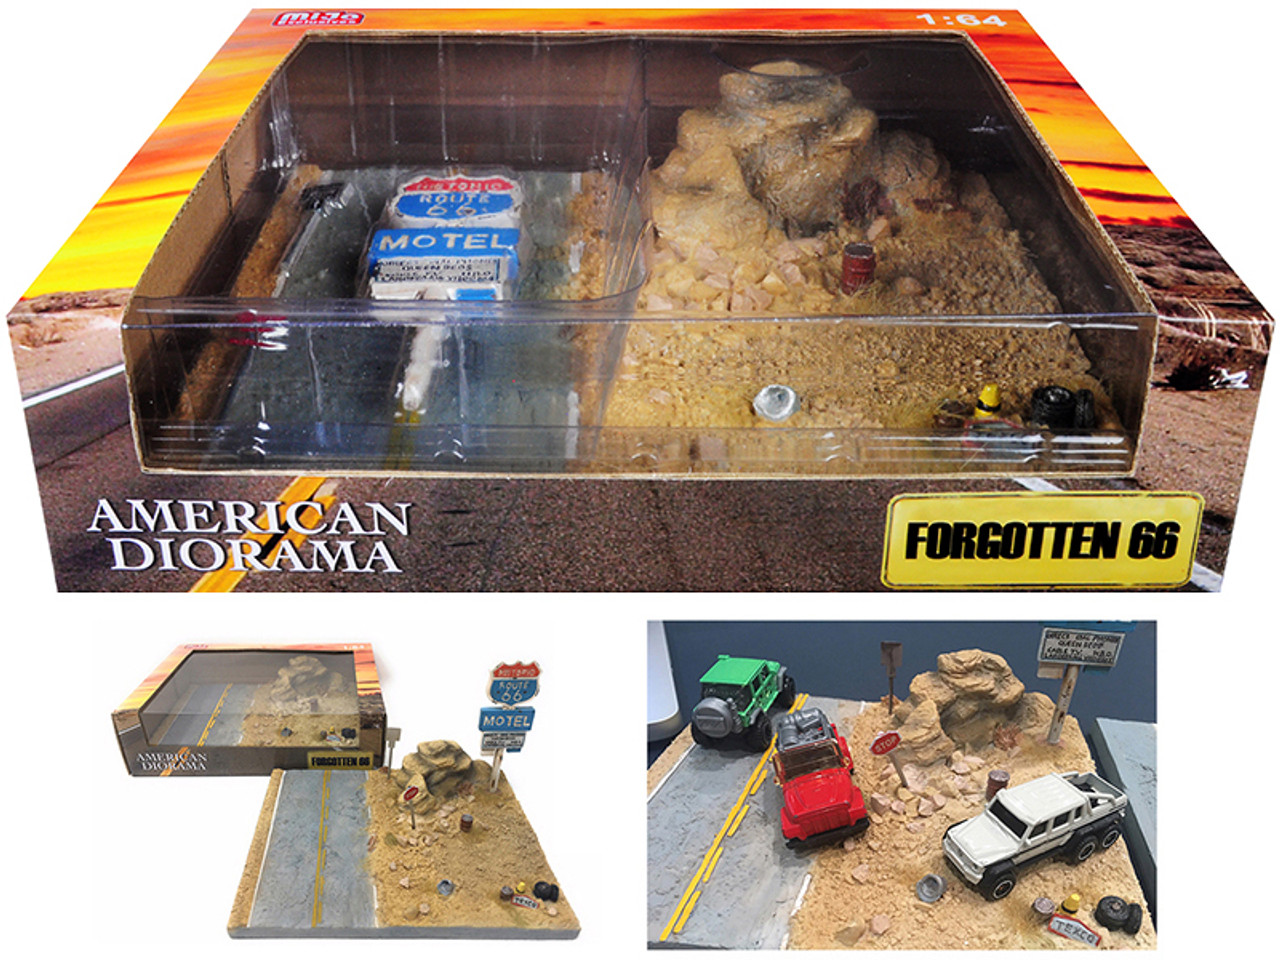 "Forgotten 66" Resin Diorama for 1/64 Scale Models by American Diorama